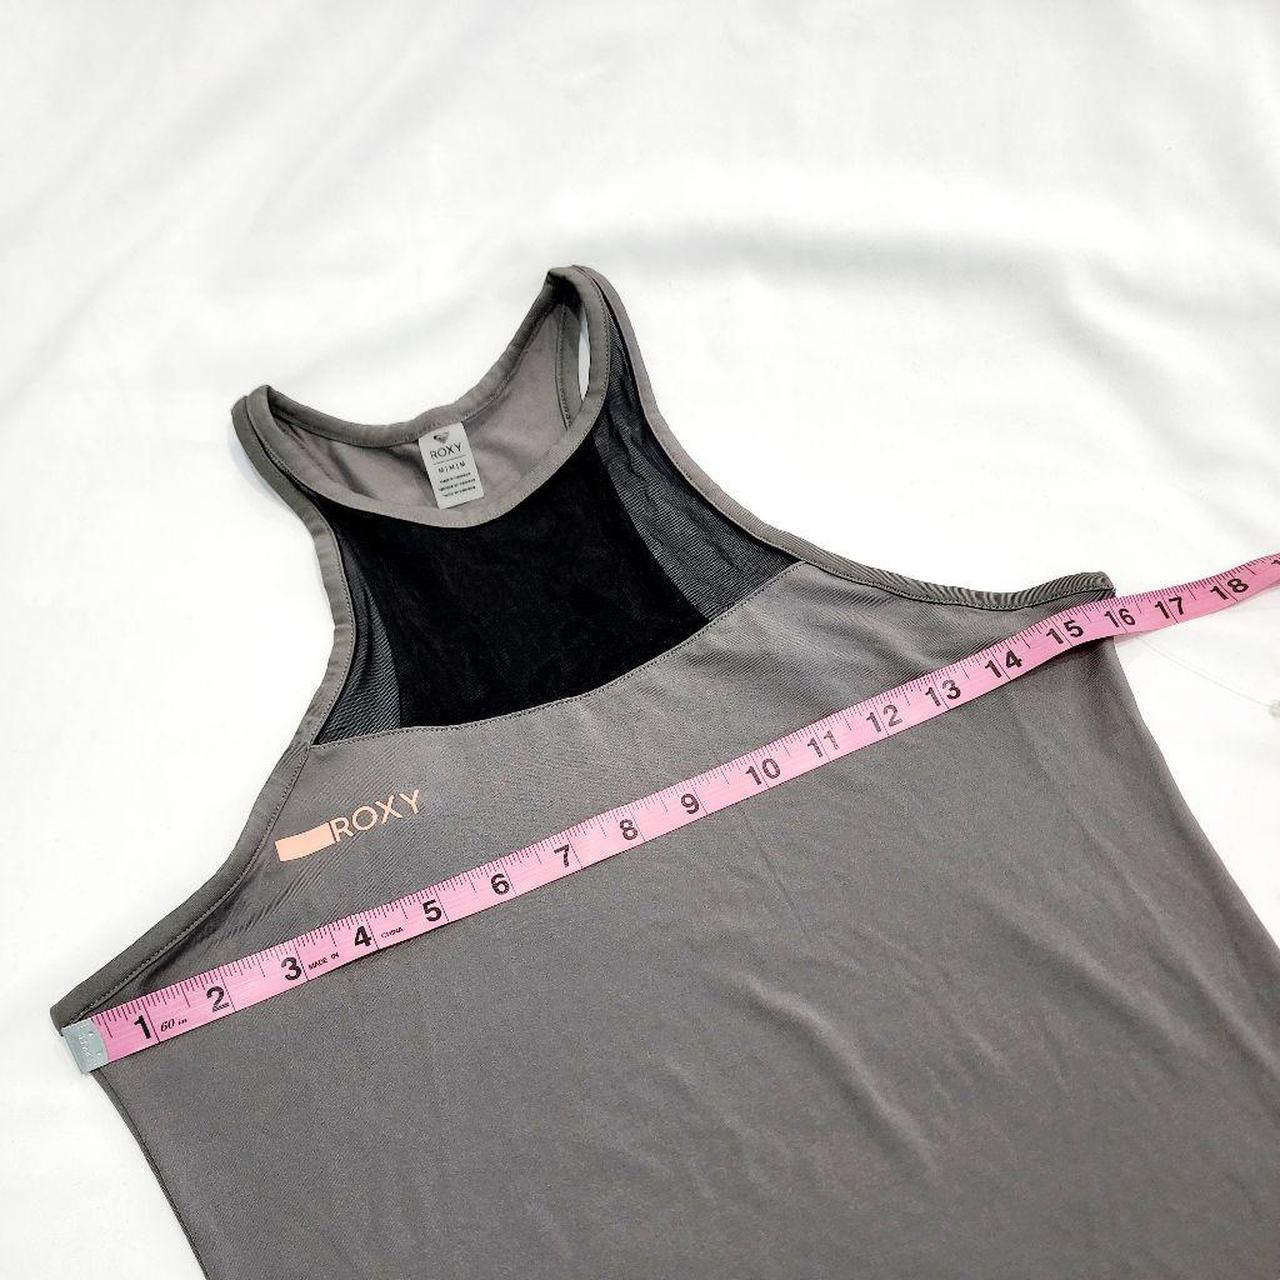 Product Image 3 - NWT and no defects

Brand: Roxy
Size: